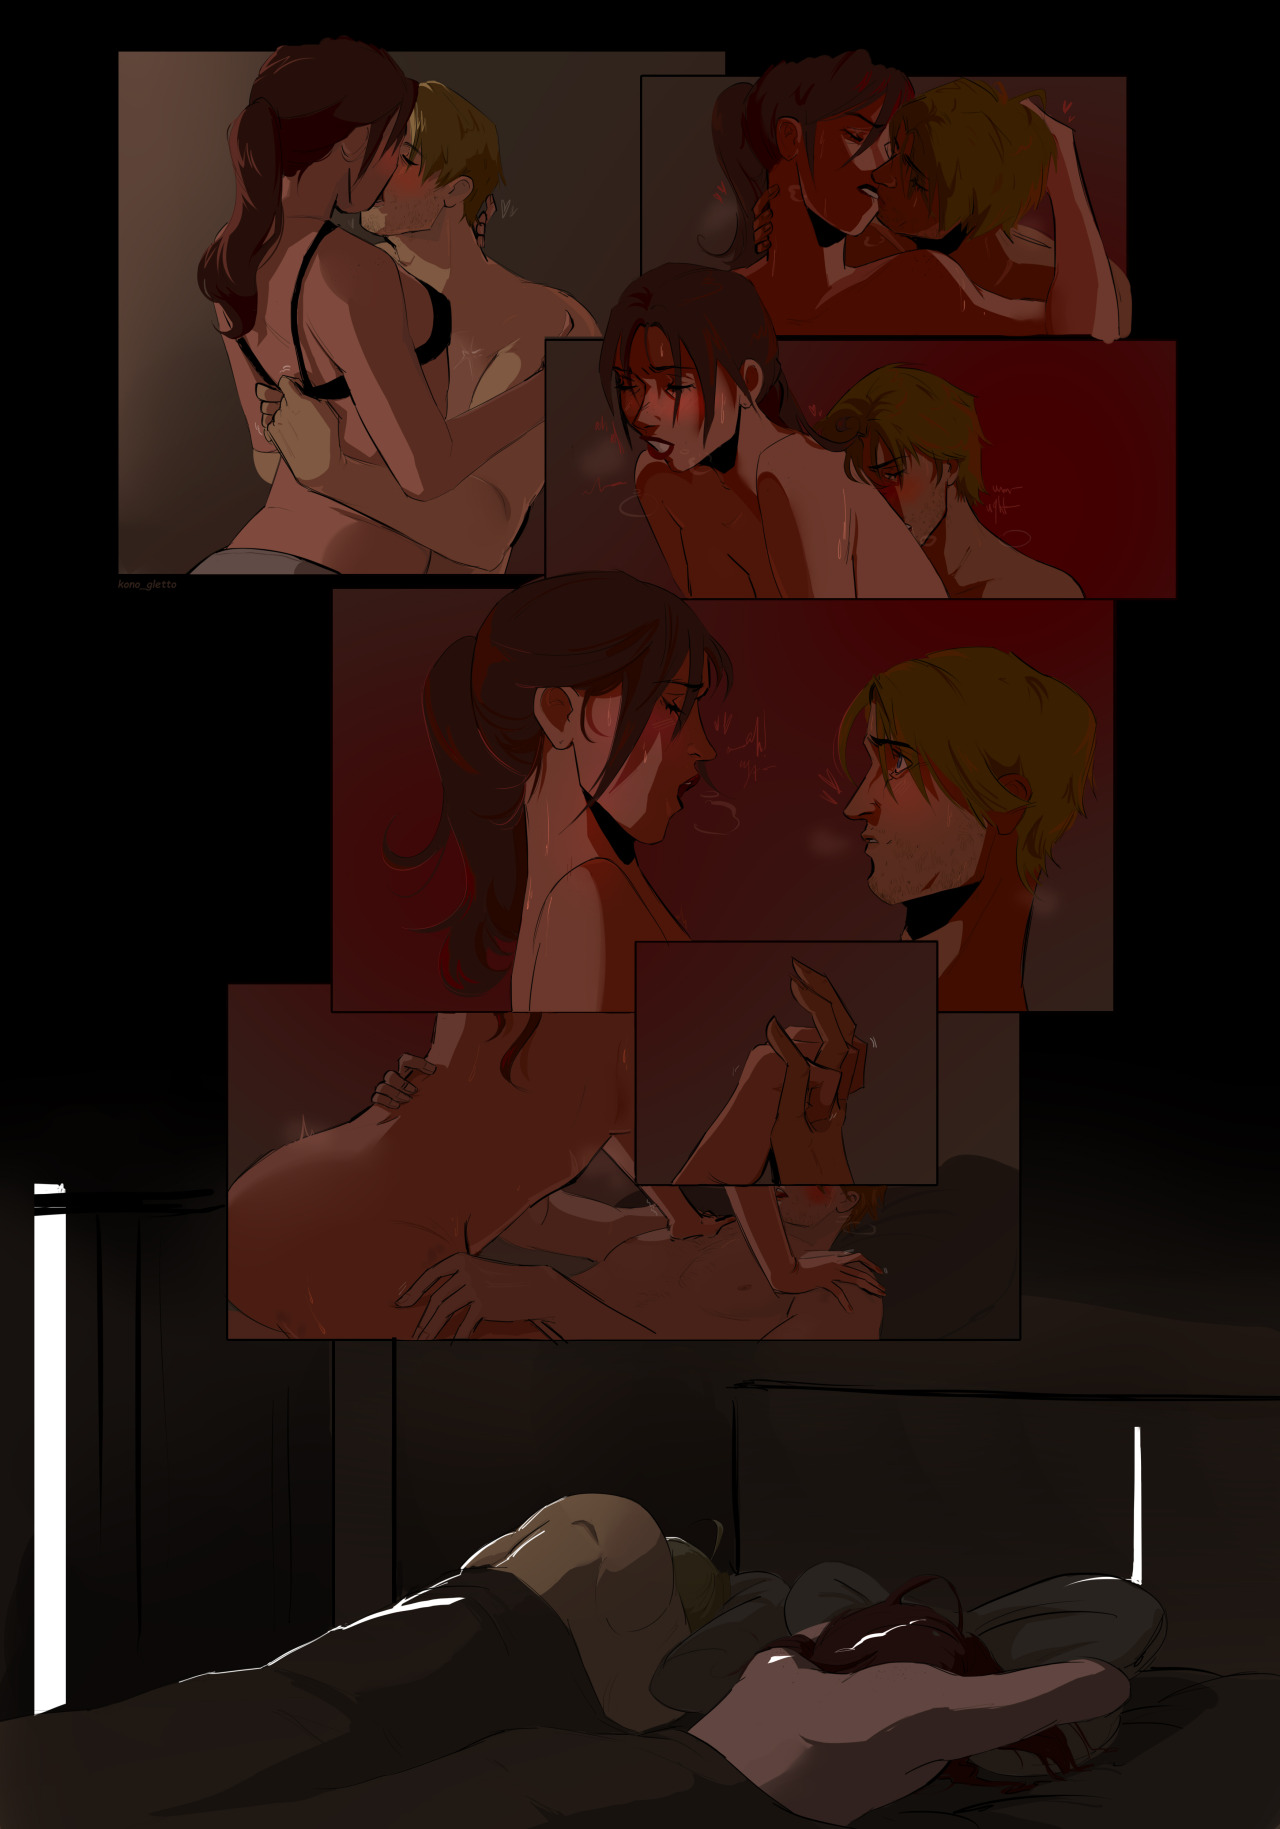 somewhere during Infinity Darkness  This idea came to me right after the series was released, and Im glad I finally made this comic. Im sorry for the broken hearts, I suffer too. #resident evil #resident evil infinite darkness #Cleon#Claire Redfield#Leon Kennedy #leon x claire